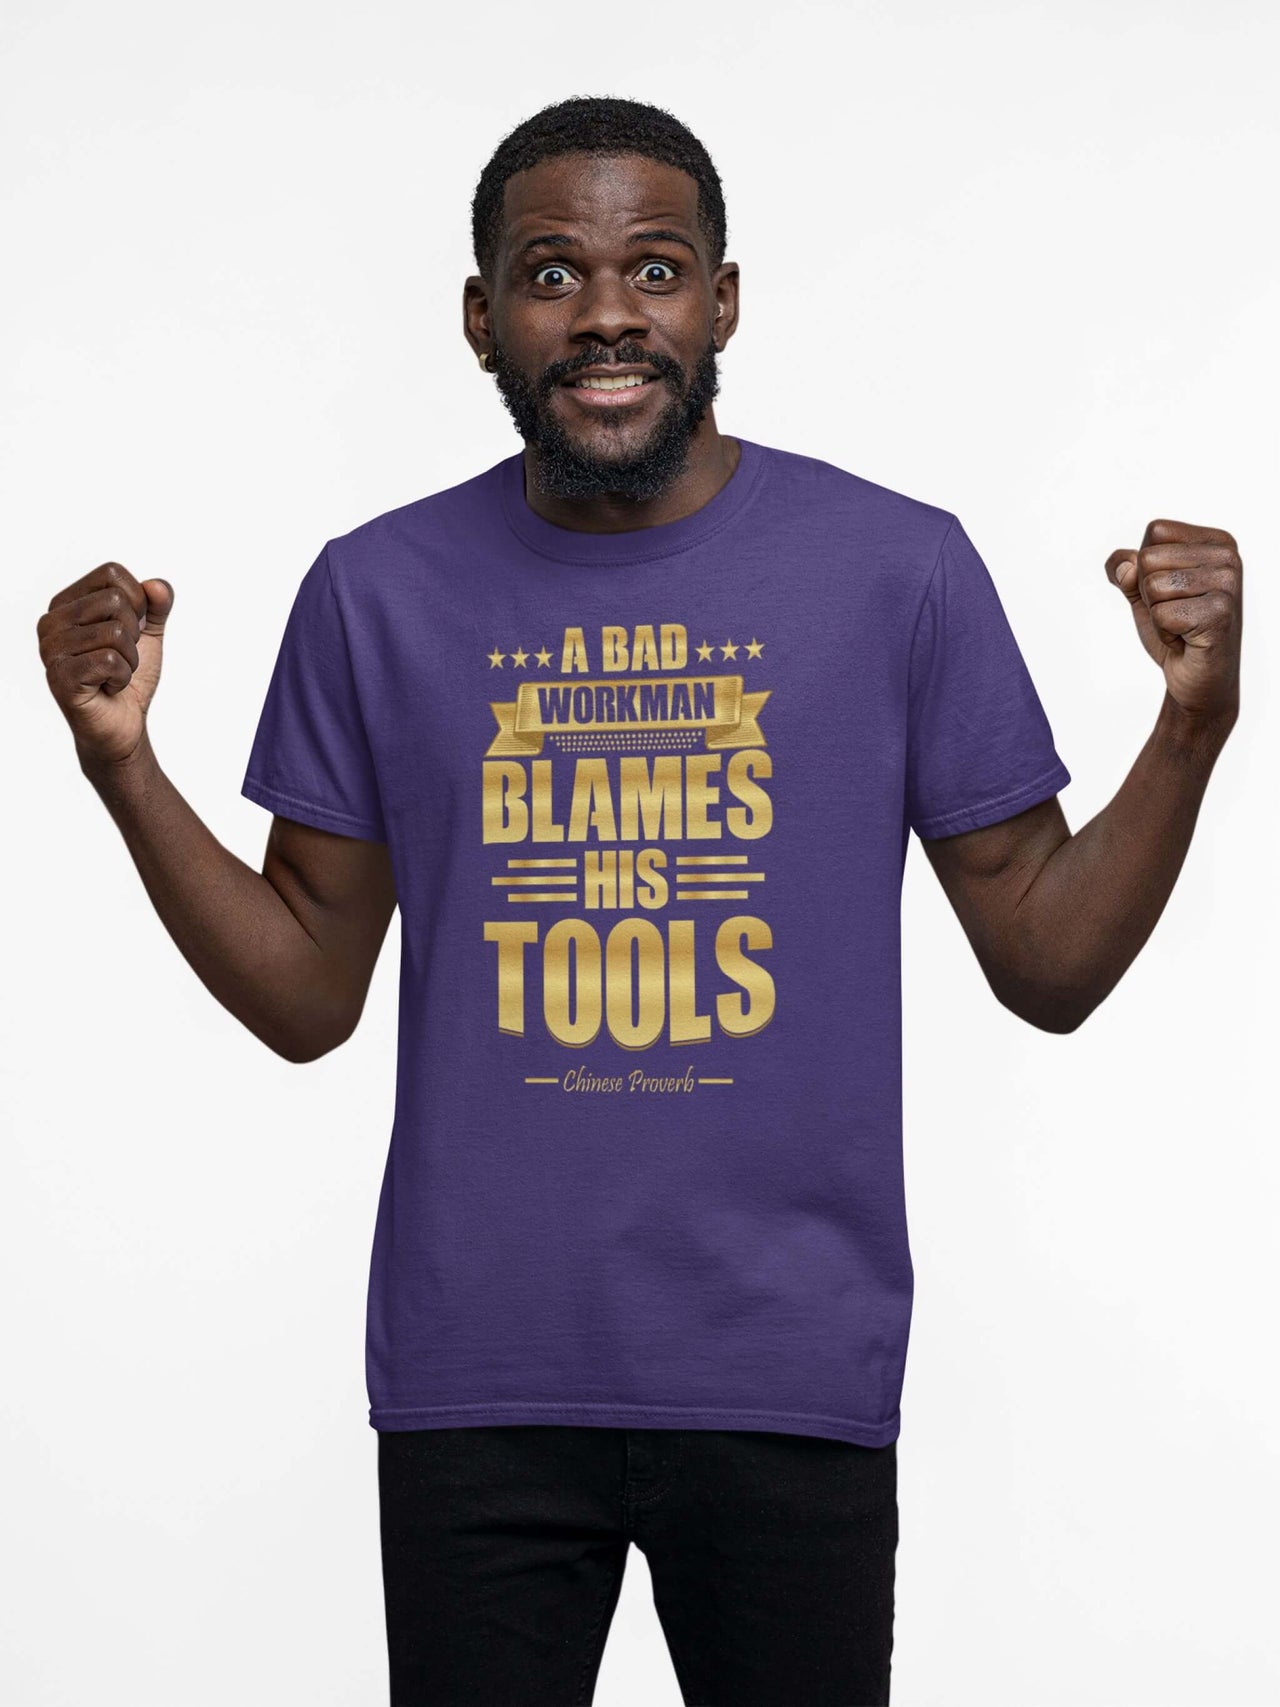 A Bad Workman Blames His Tools - Chinese Proverb - Unisex Tee